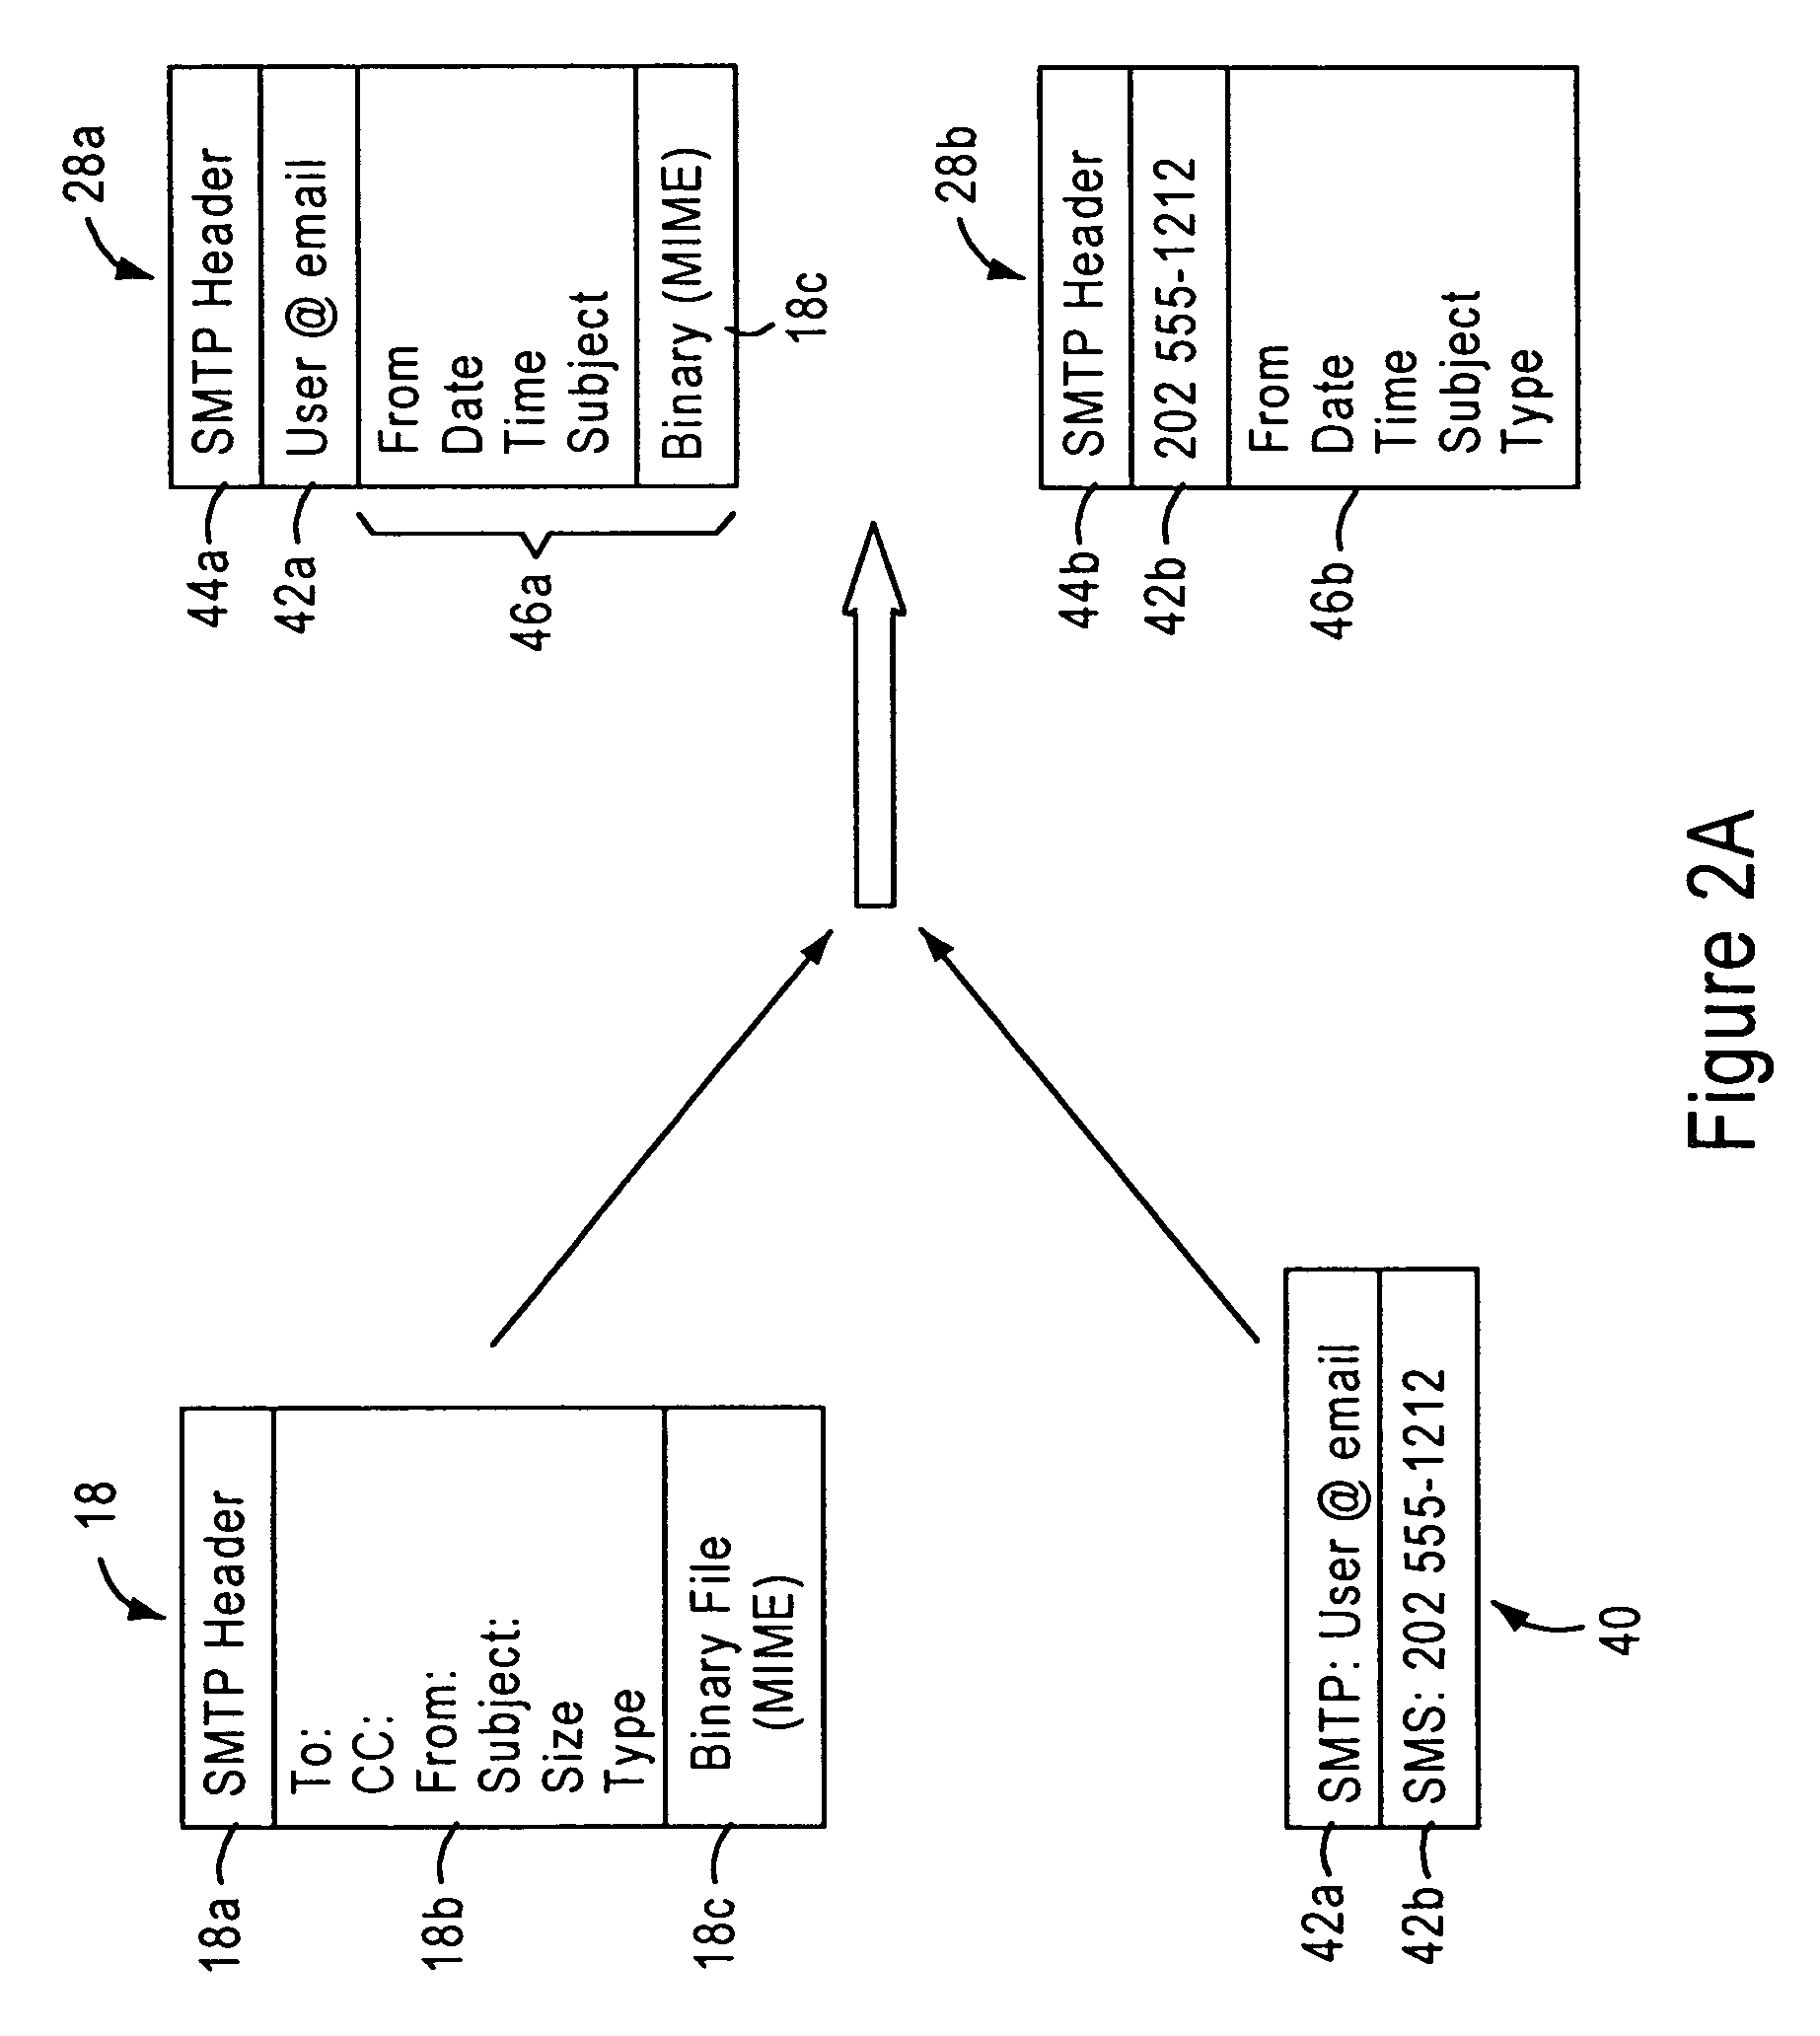 Arrangement for common-format notification delivery messages based on notification device type in an IP-based notification architecture